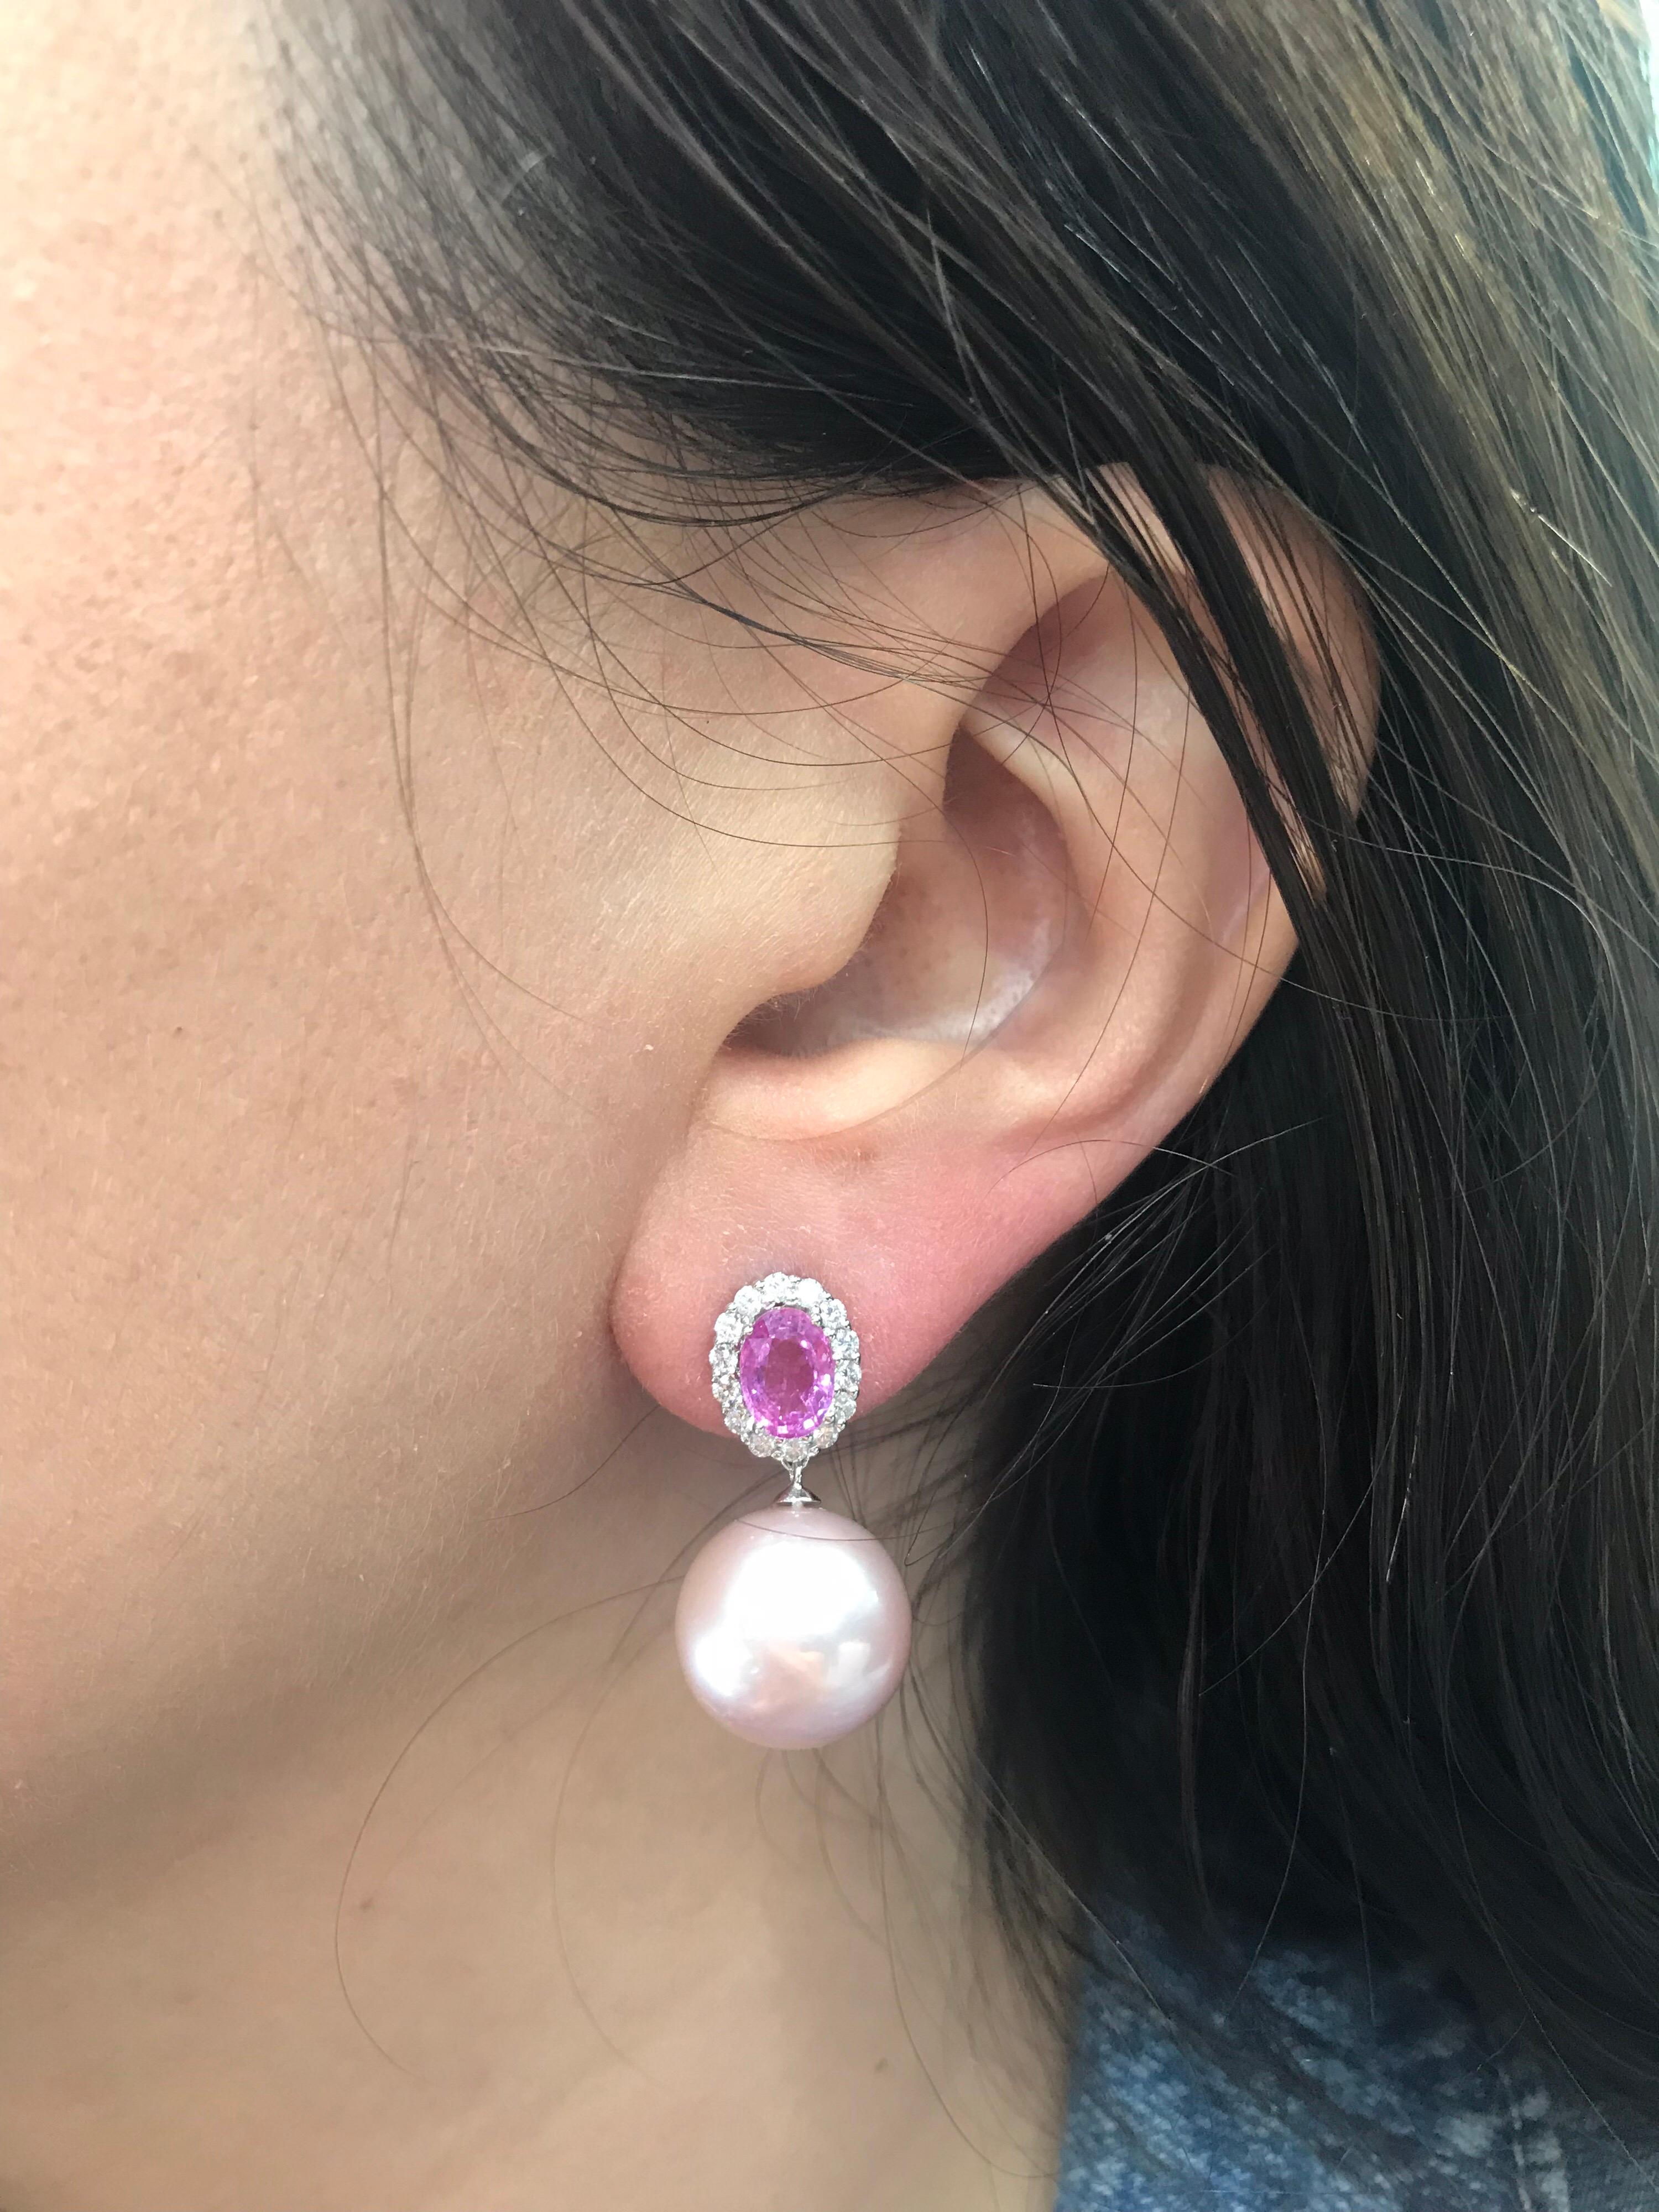 18K White gold drop earrings featuring two oval shape pink sapphires, 1.85 carats, flanked with round brilliants 0.47 carats and two Pink Freshwater pearls measuring 13-14 mm. 